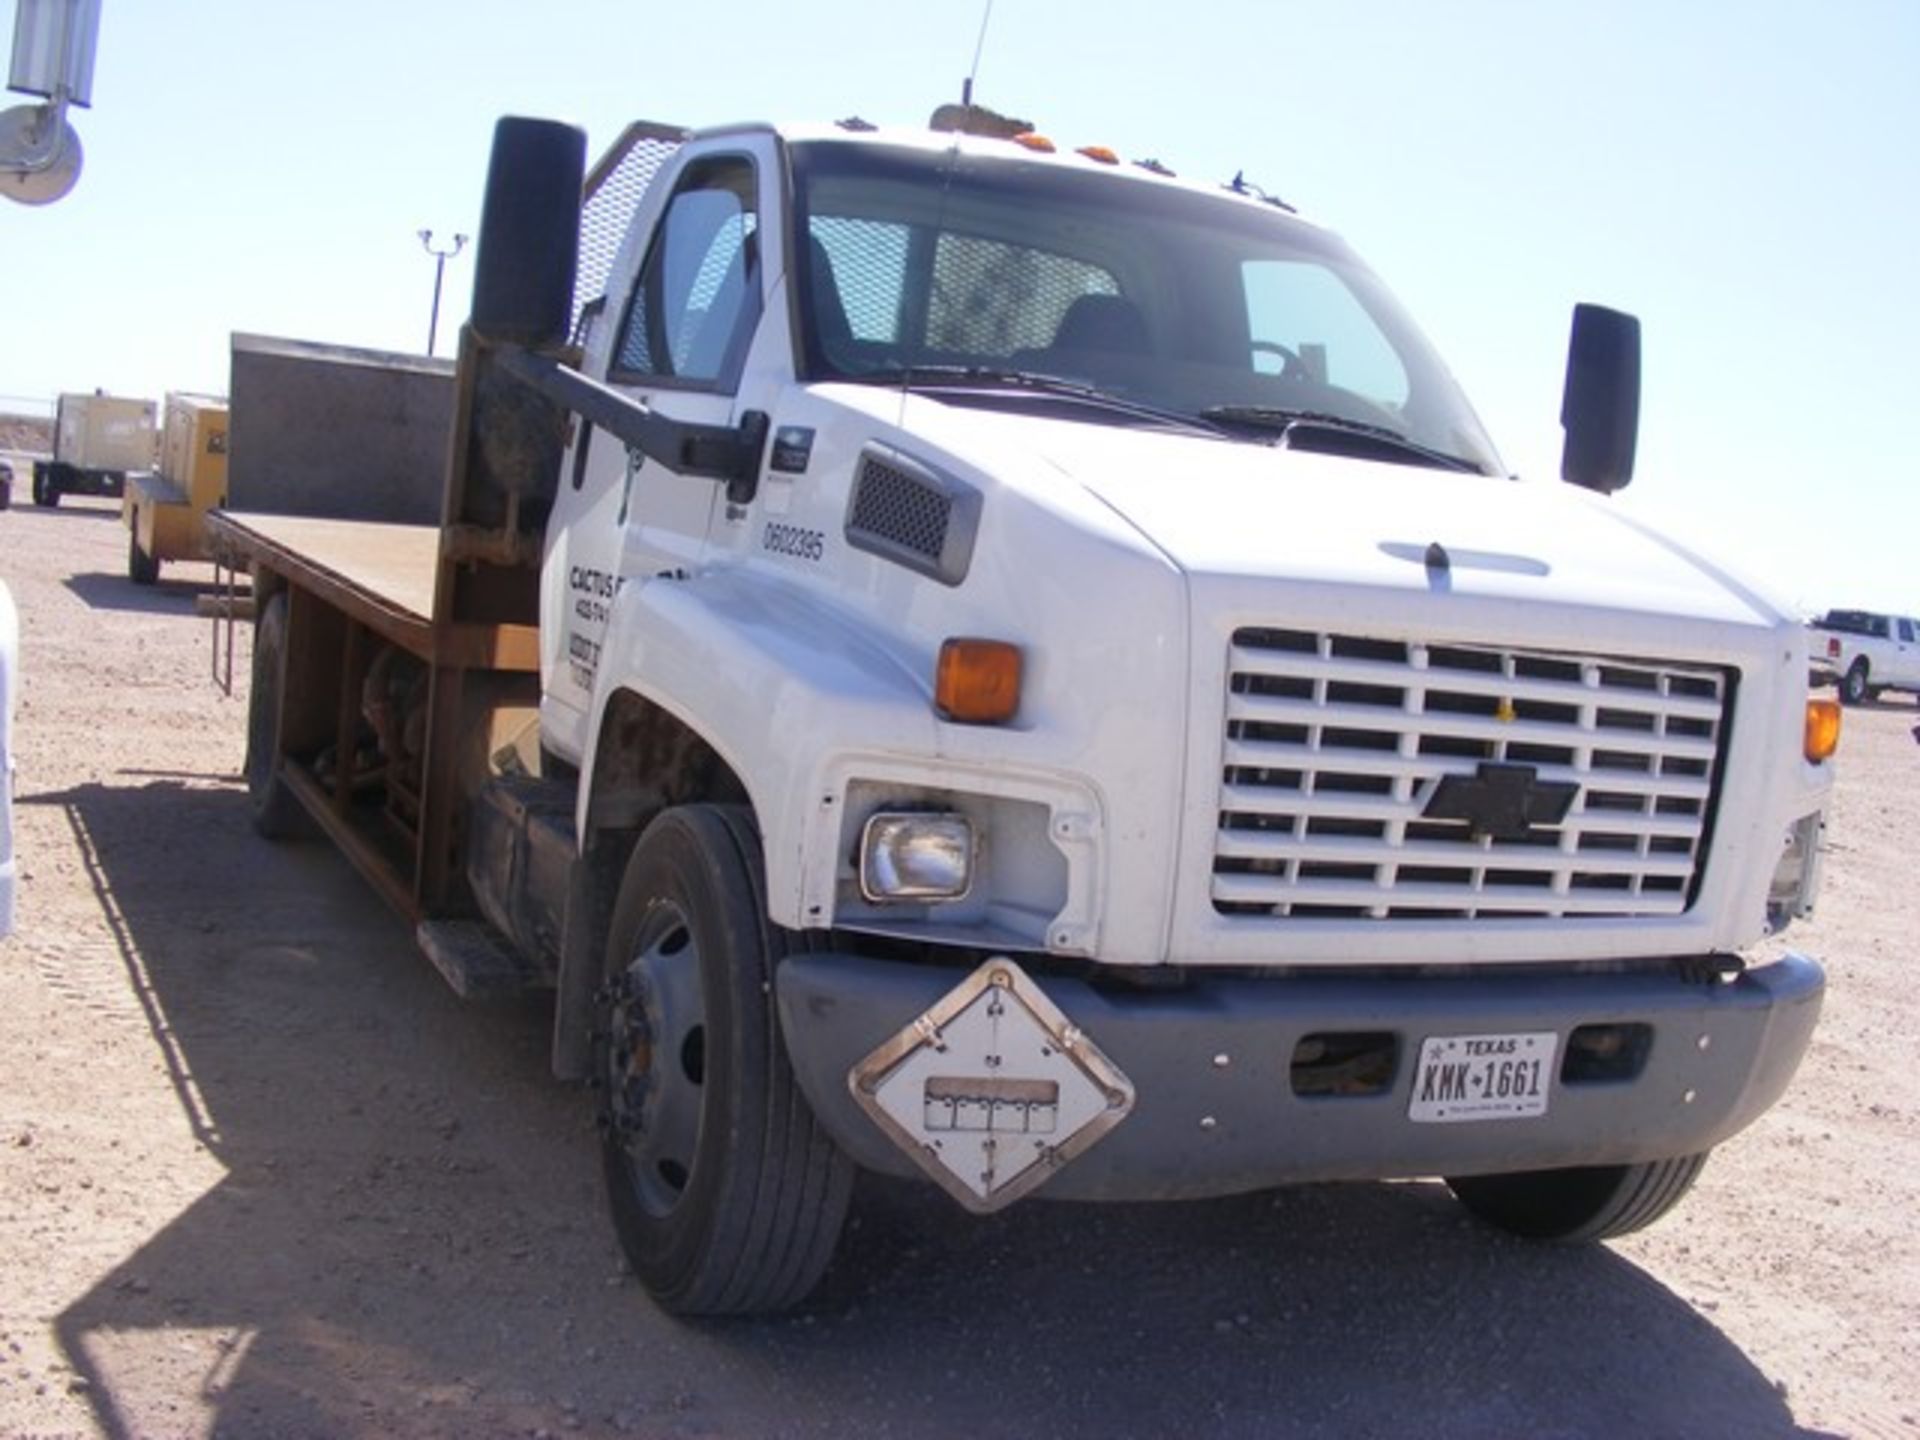 Located in YARD 1 - Midland, TX (2395) (X) 2006 CHEVROLET C7500 S/A DAY CAB STAKE BED TRUCK, VIN- - Image 2 of 10